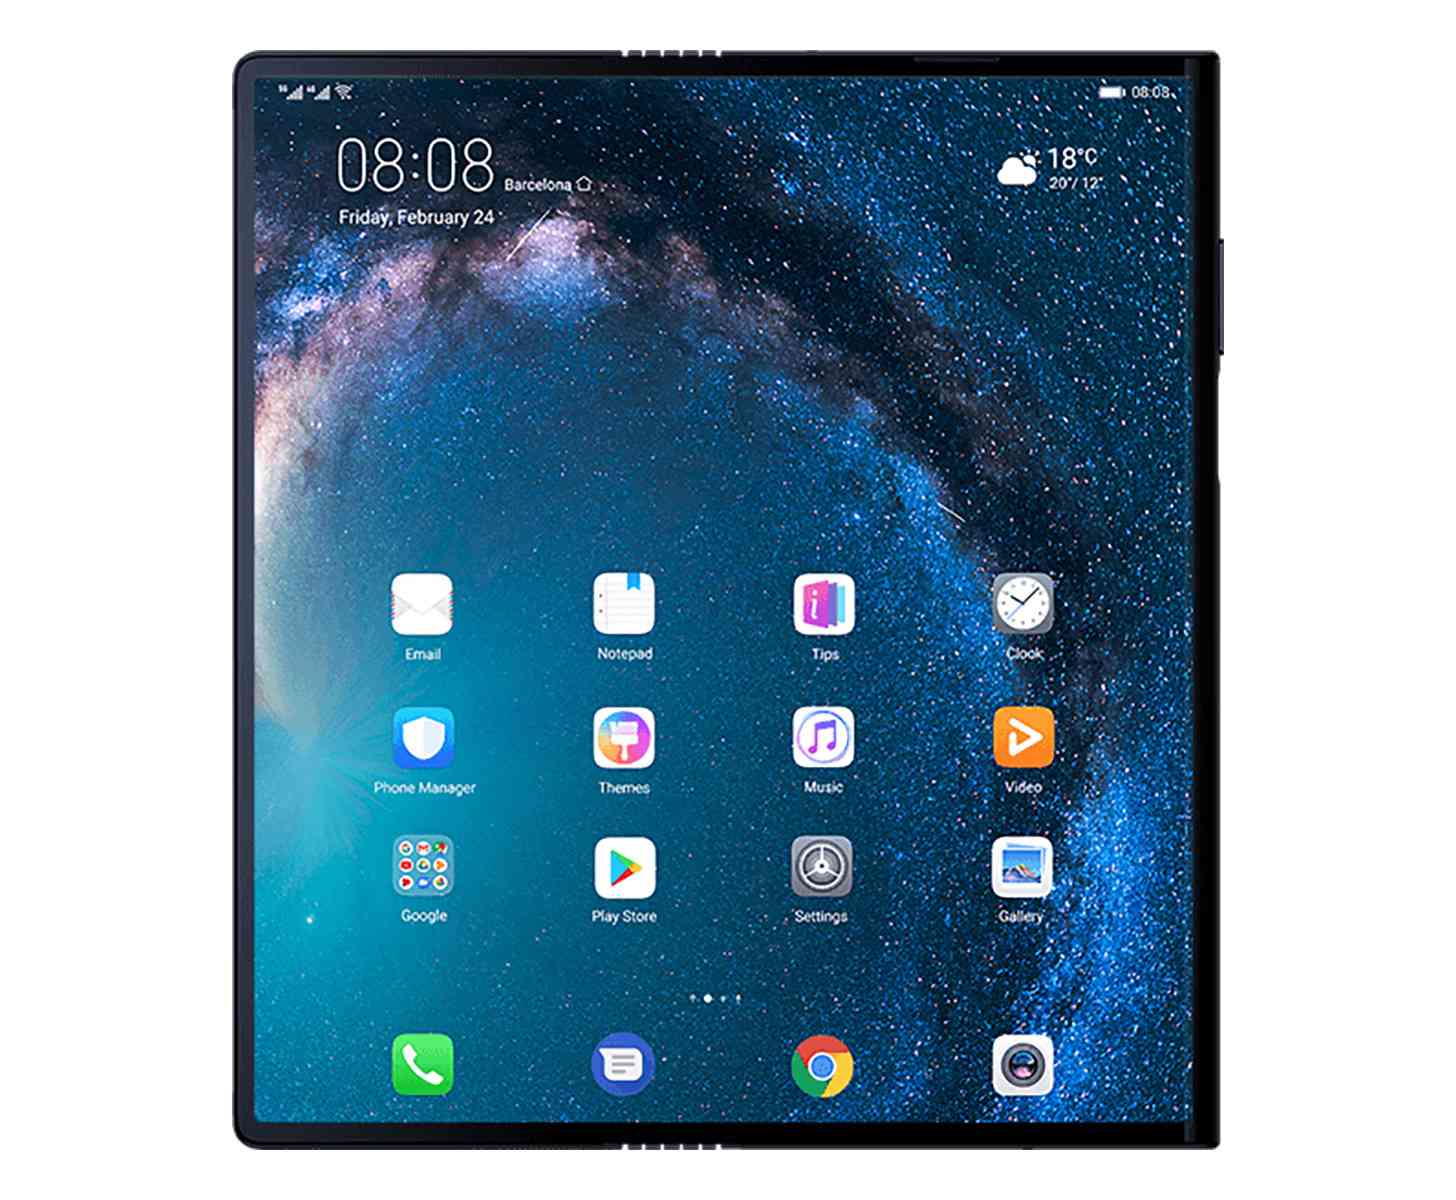 Huawei Mate X official